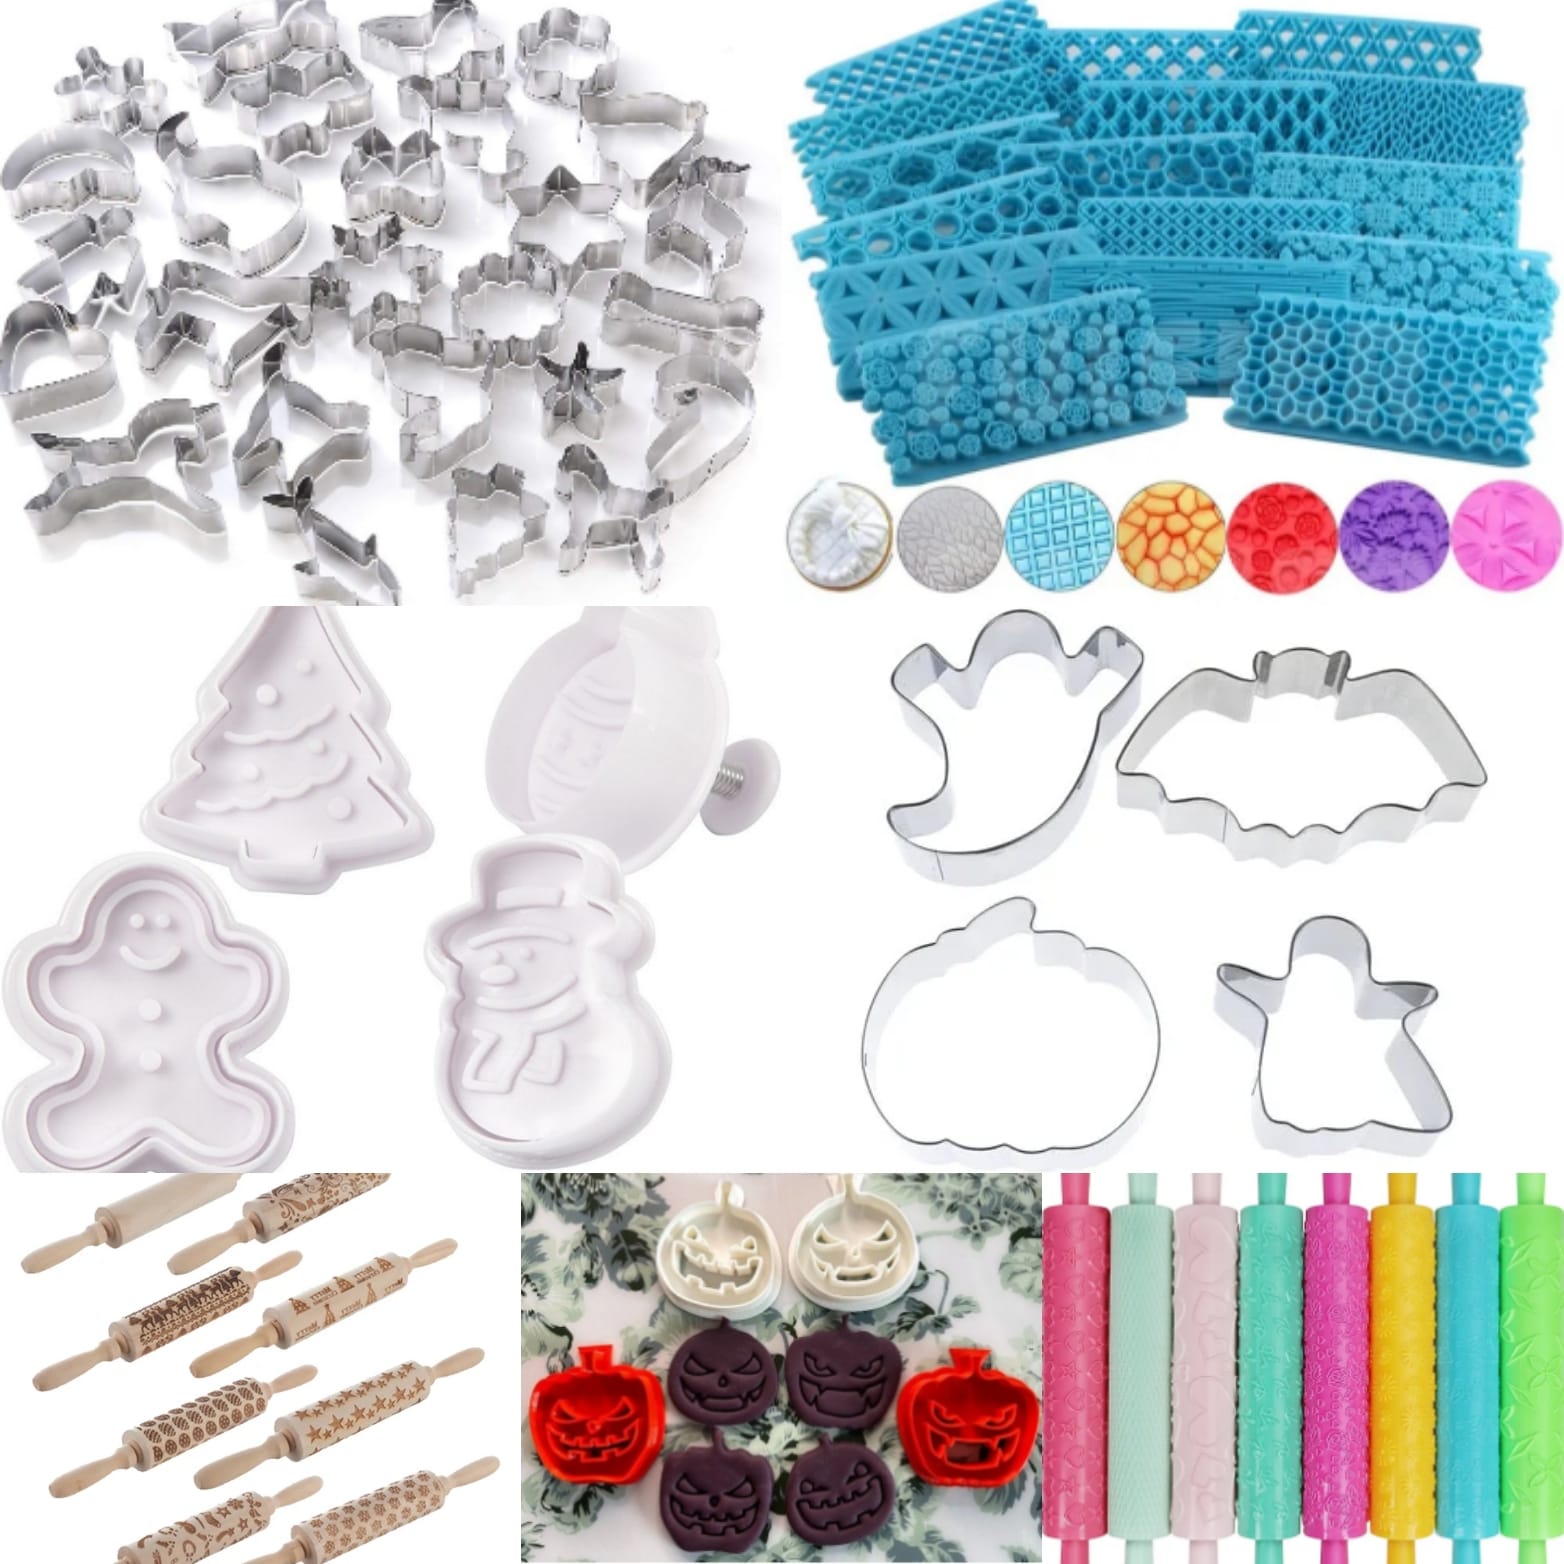 Various cookie cutters and embossing tools